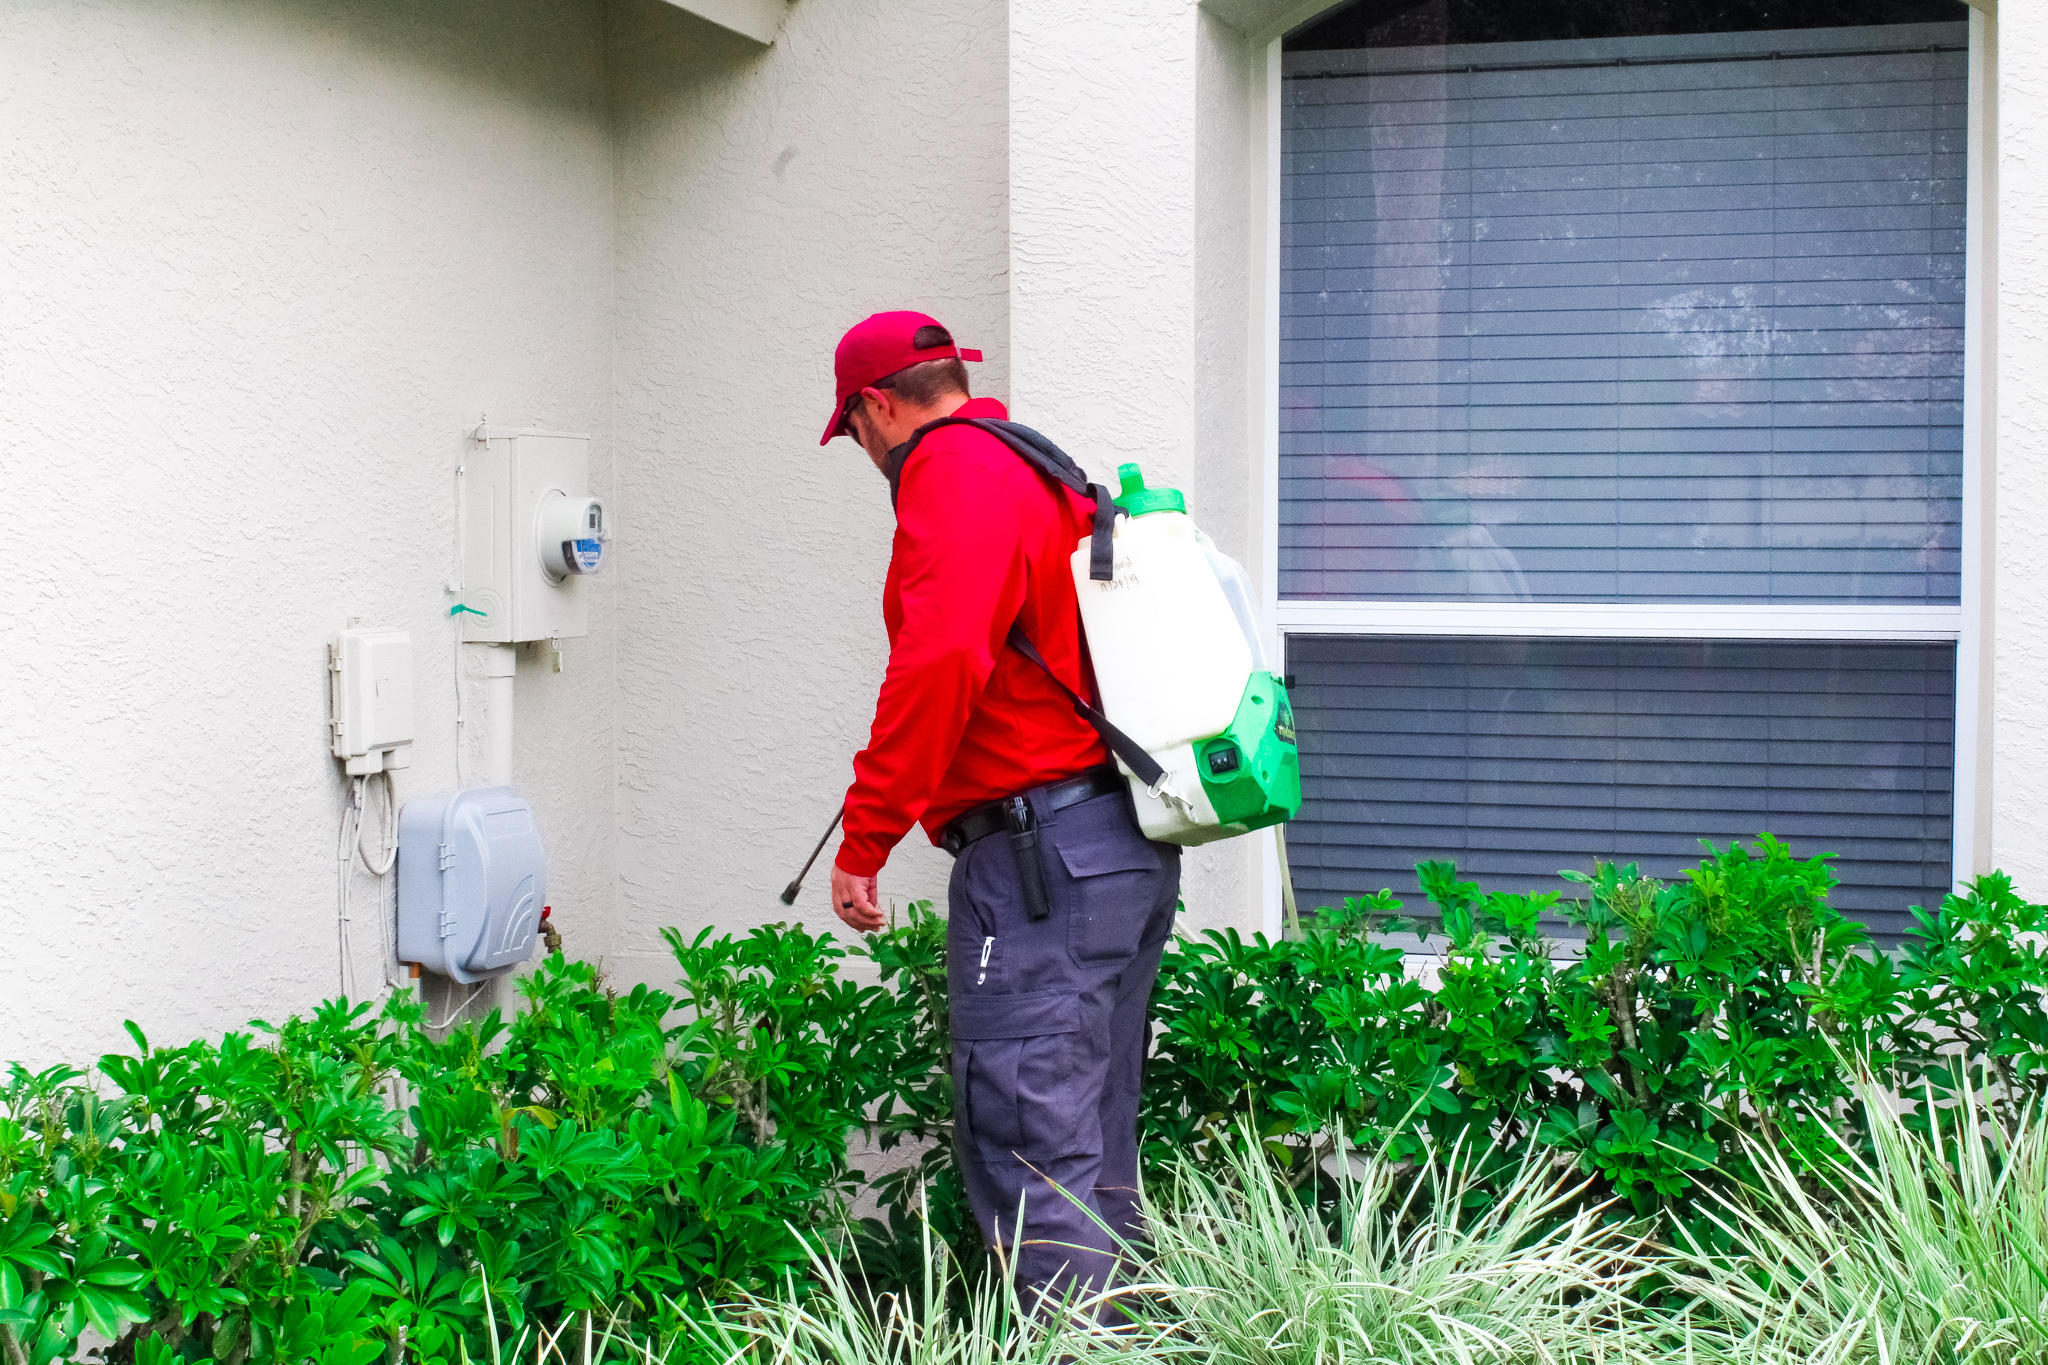 Pests don’t just stick to a single path, so we get off the beaten trail to ensure their travels to your home stop immediately. Our highly experienced technicians will go to great lengths to ensure the perimeter of your home is safe and secure. Call us today to learn more and for a free quote!